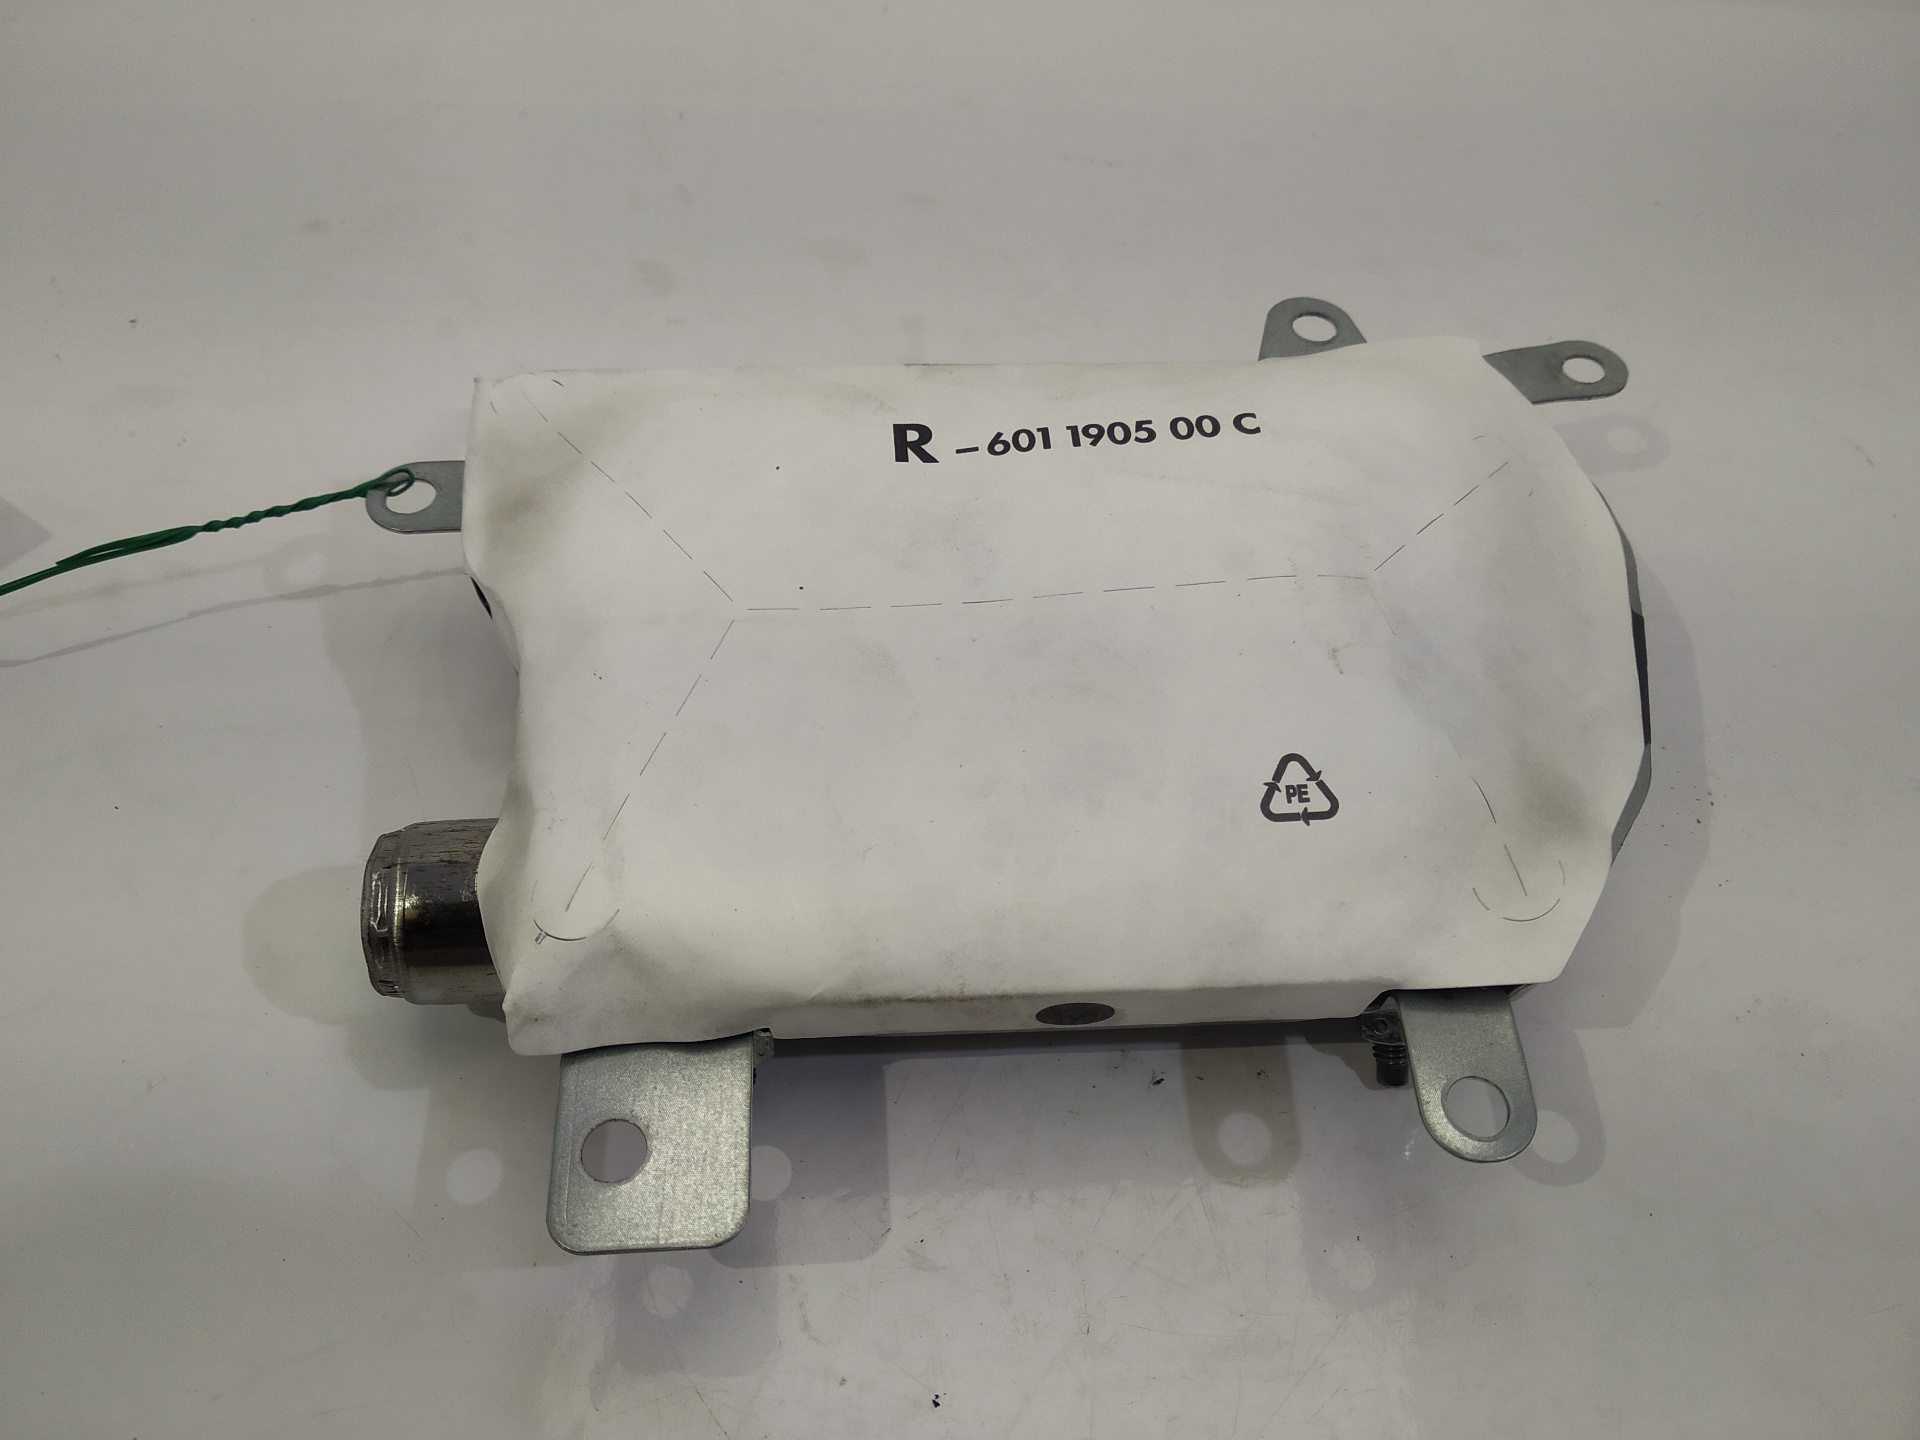 BMW 5 Series E60/E61 (2003-2010) Rear Right Door Airbag SRS 7034060, 7034060, 7034060 24515595